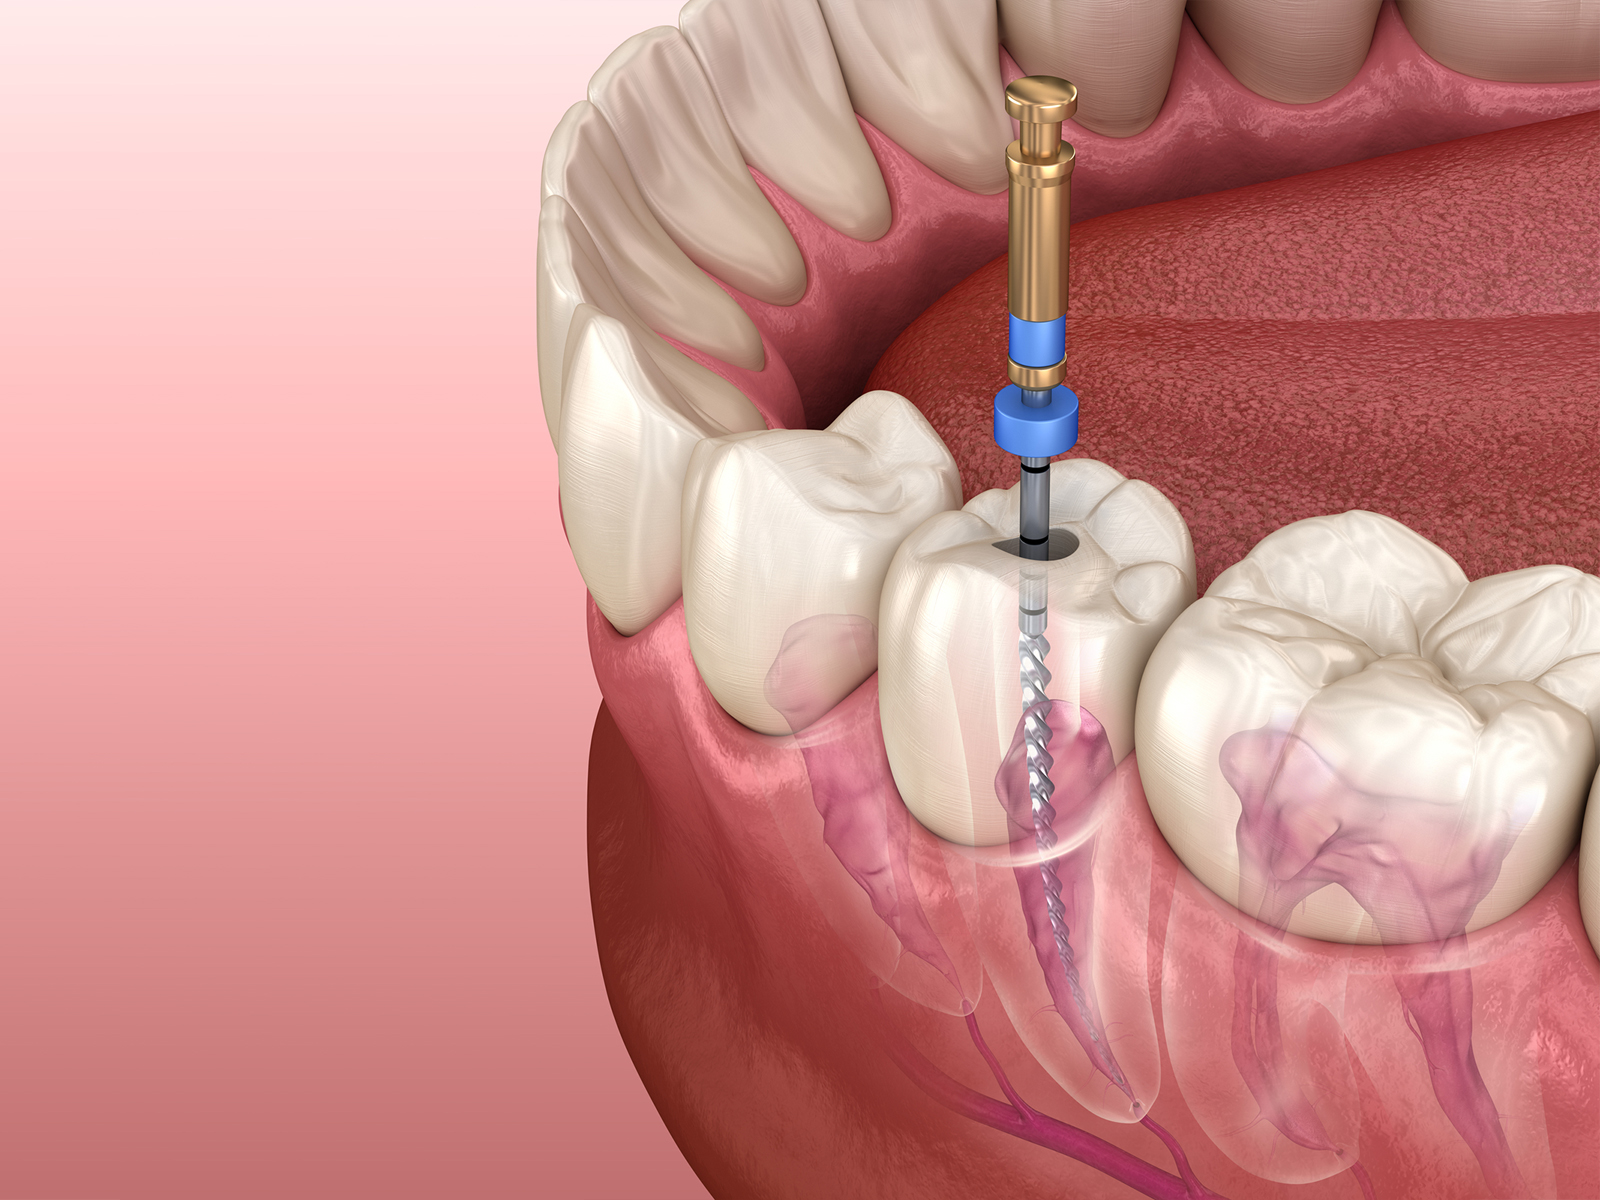 How long does a root canal last to heal?